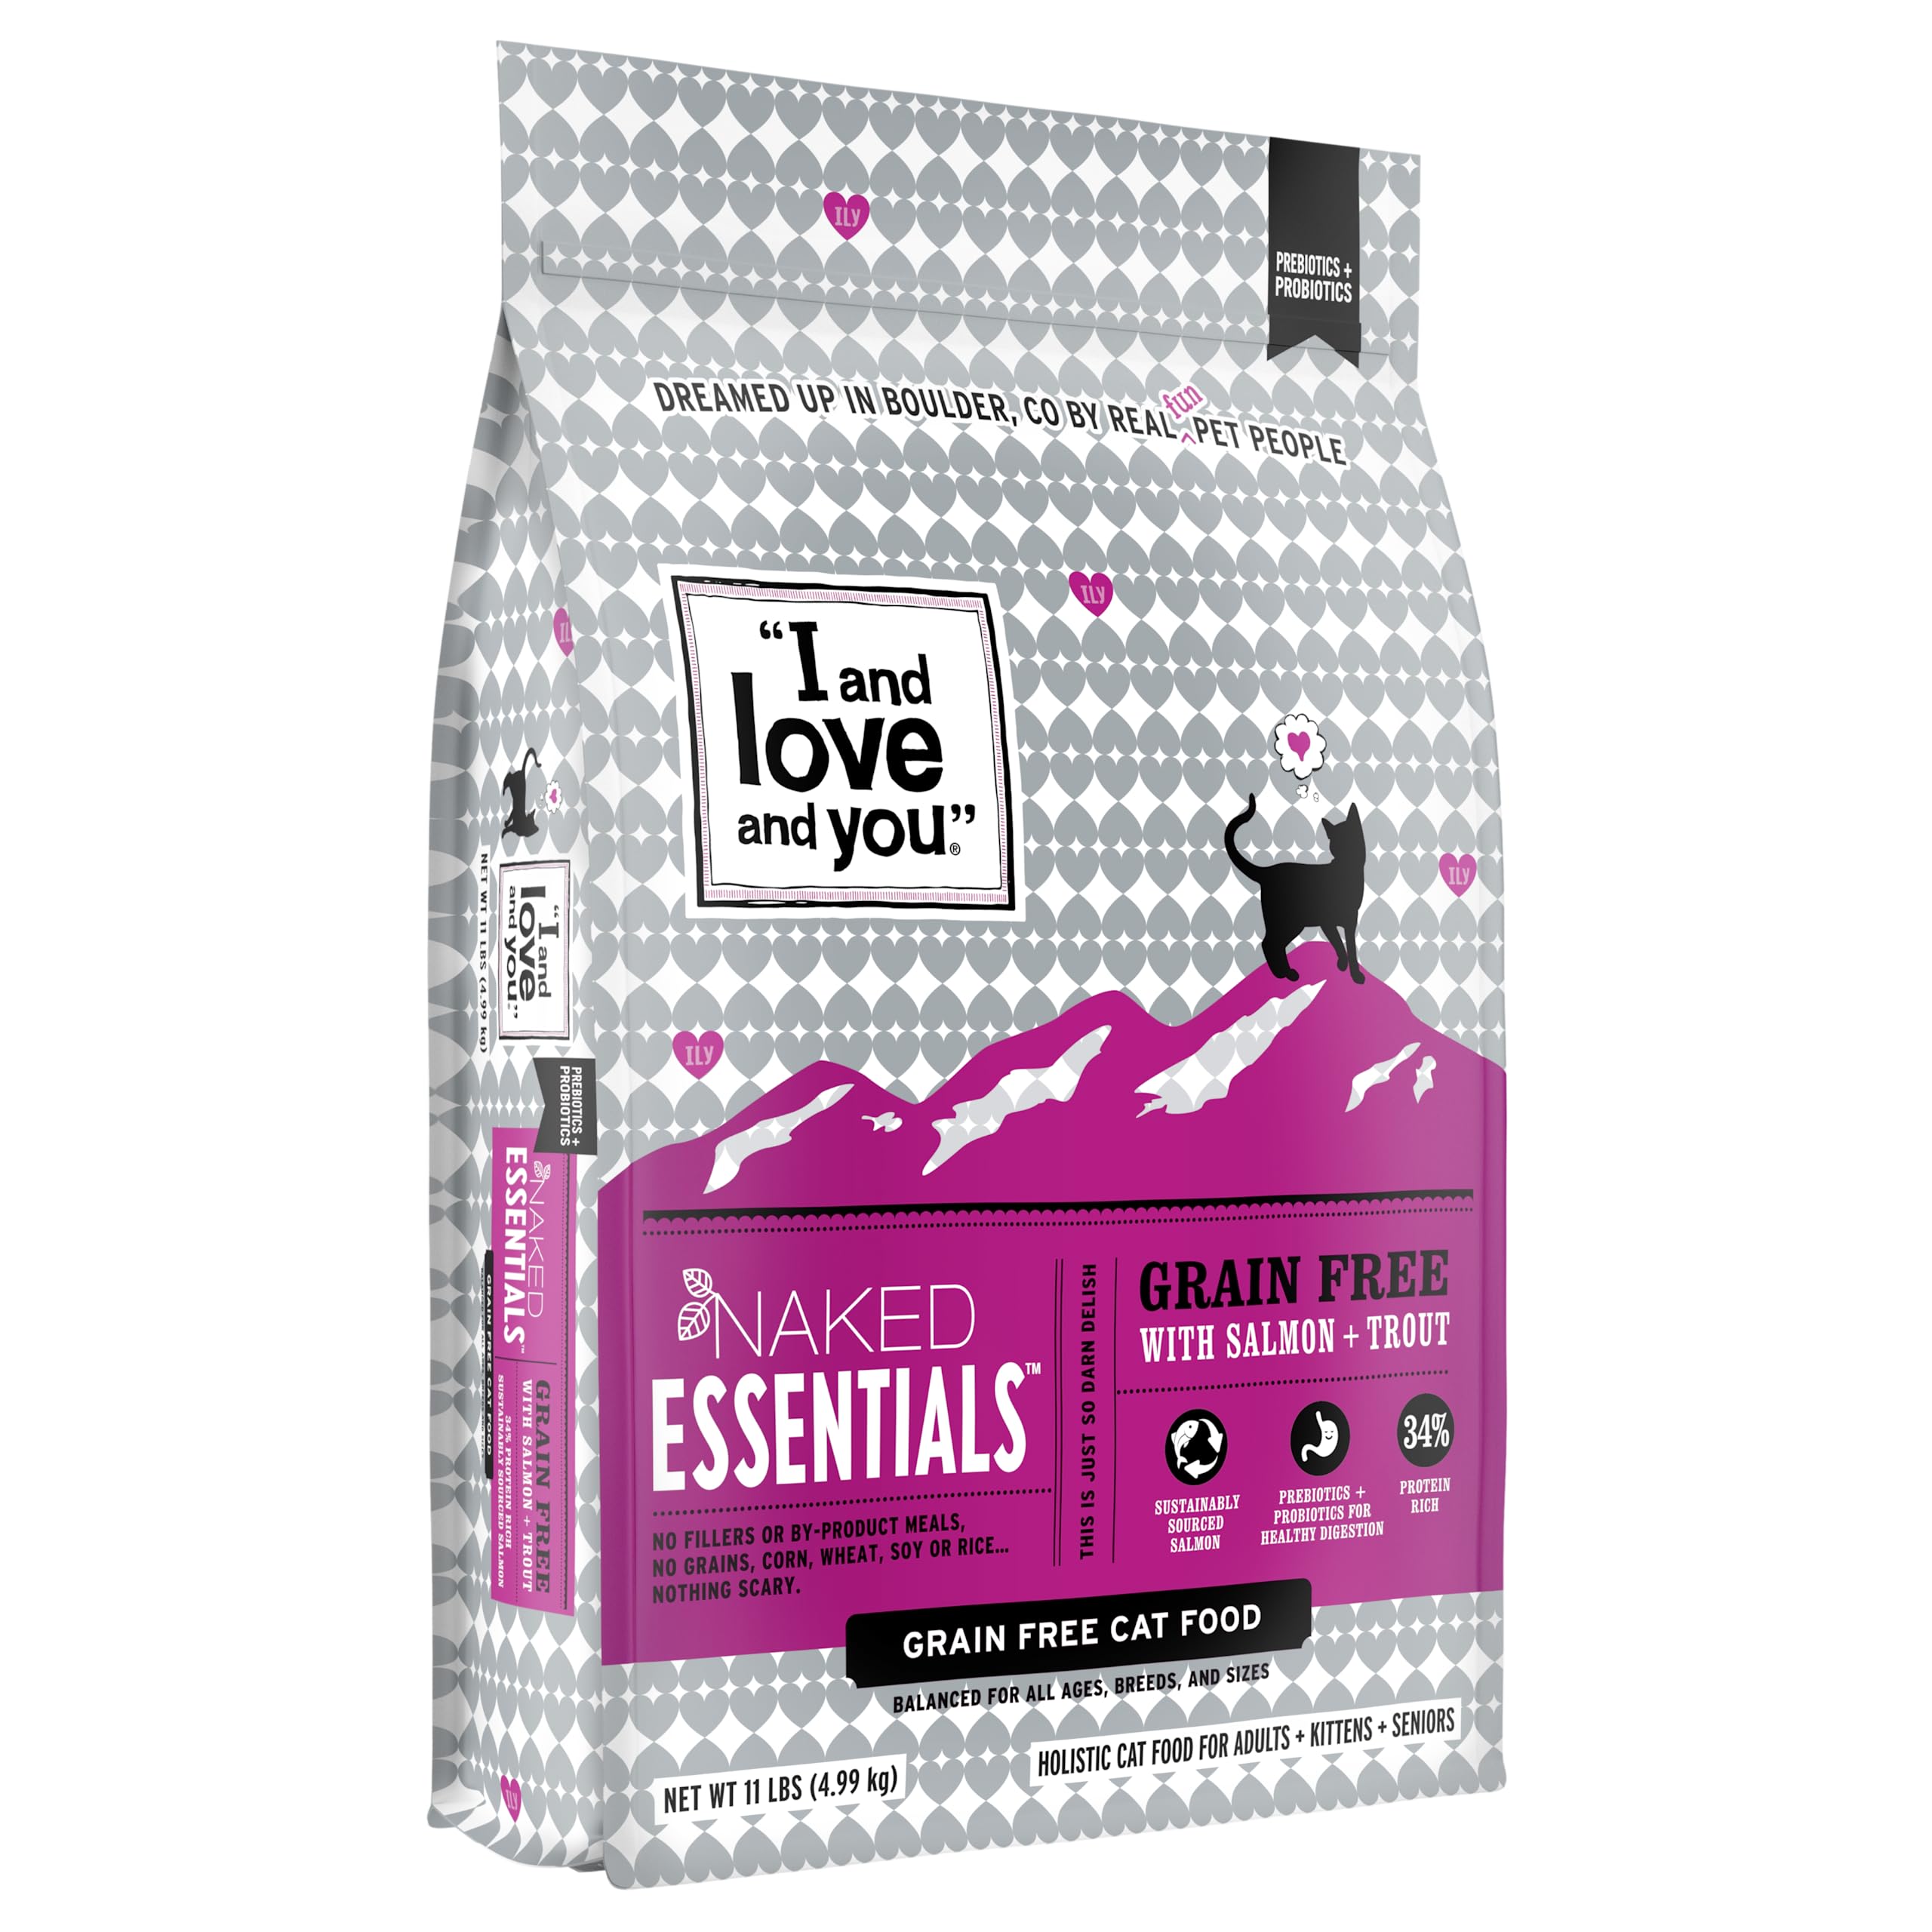 $18.74 w/ S&S: "I and love and you" Naked Essentials Dry Cat Food, Salmon + Trout, 11-Pound Bag (F14110)